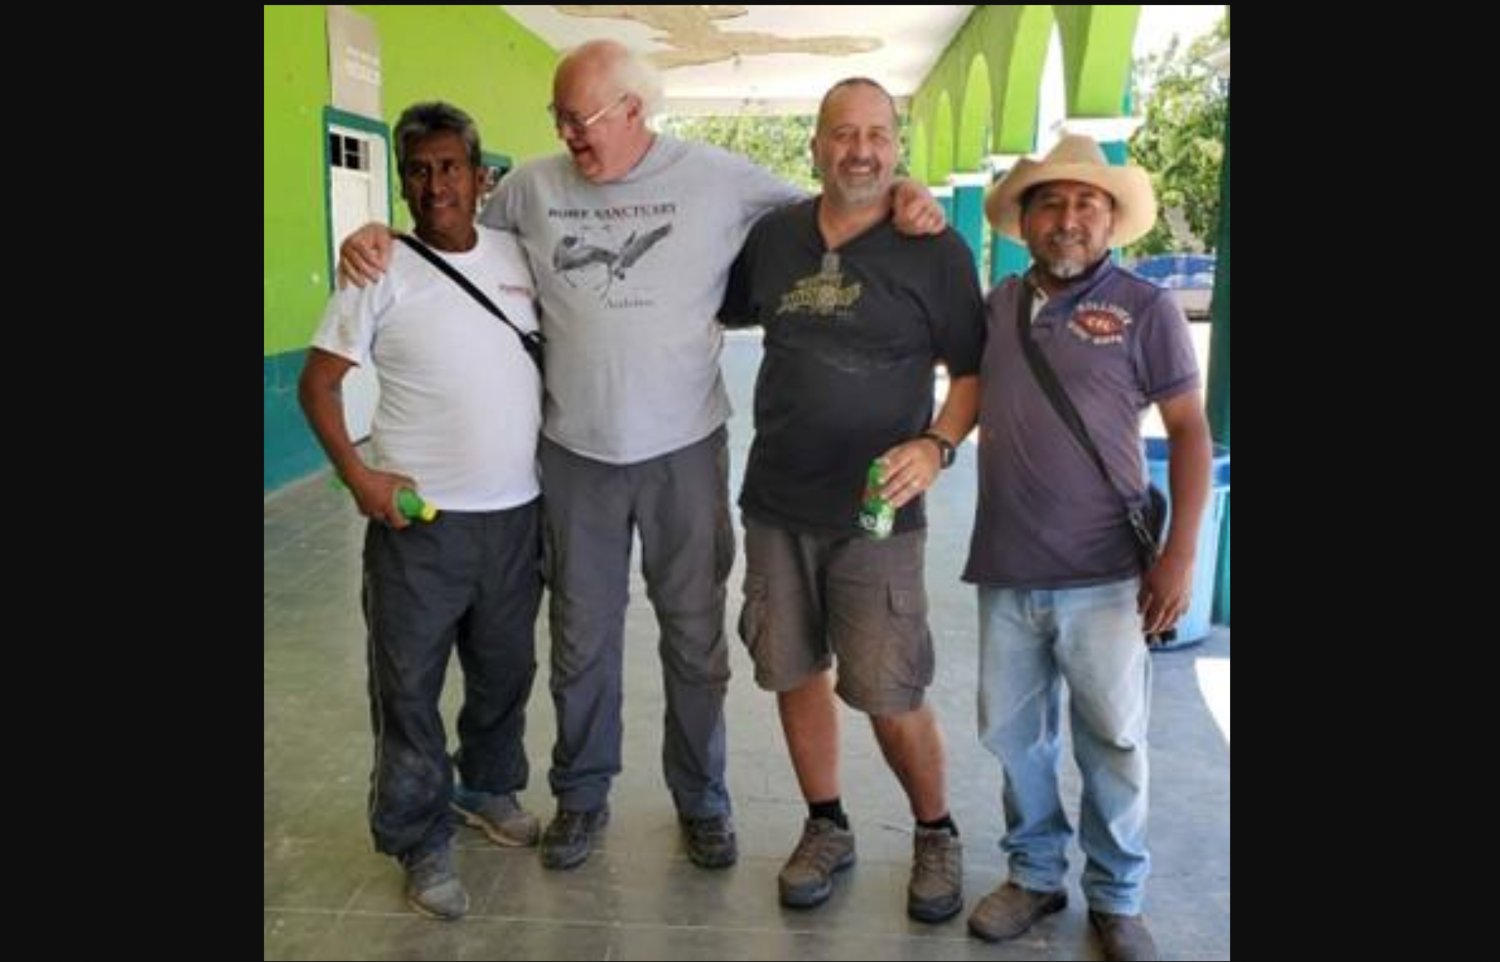 Larry McGee of Twin Cities Rotary is pictured second from left in this photo provided by Twin Cities Rotary. Over the last two years, Twin Cities Rotary has helped a village in Mexico called Plan del Vergel create and build a system to give the entire village clean water. Plan del Vergel is in Oaxaca State.